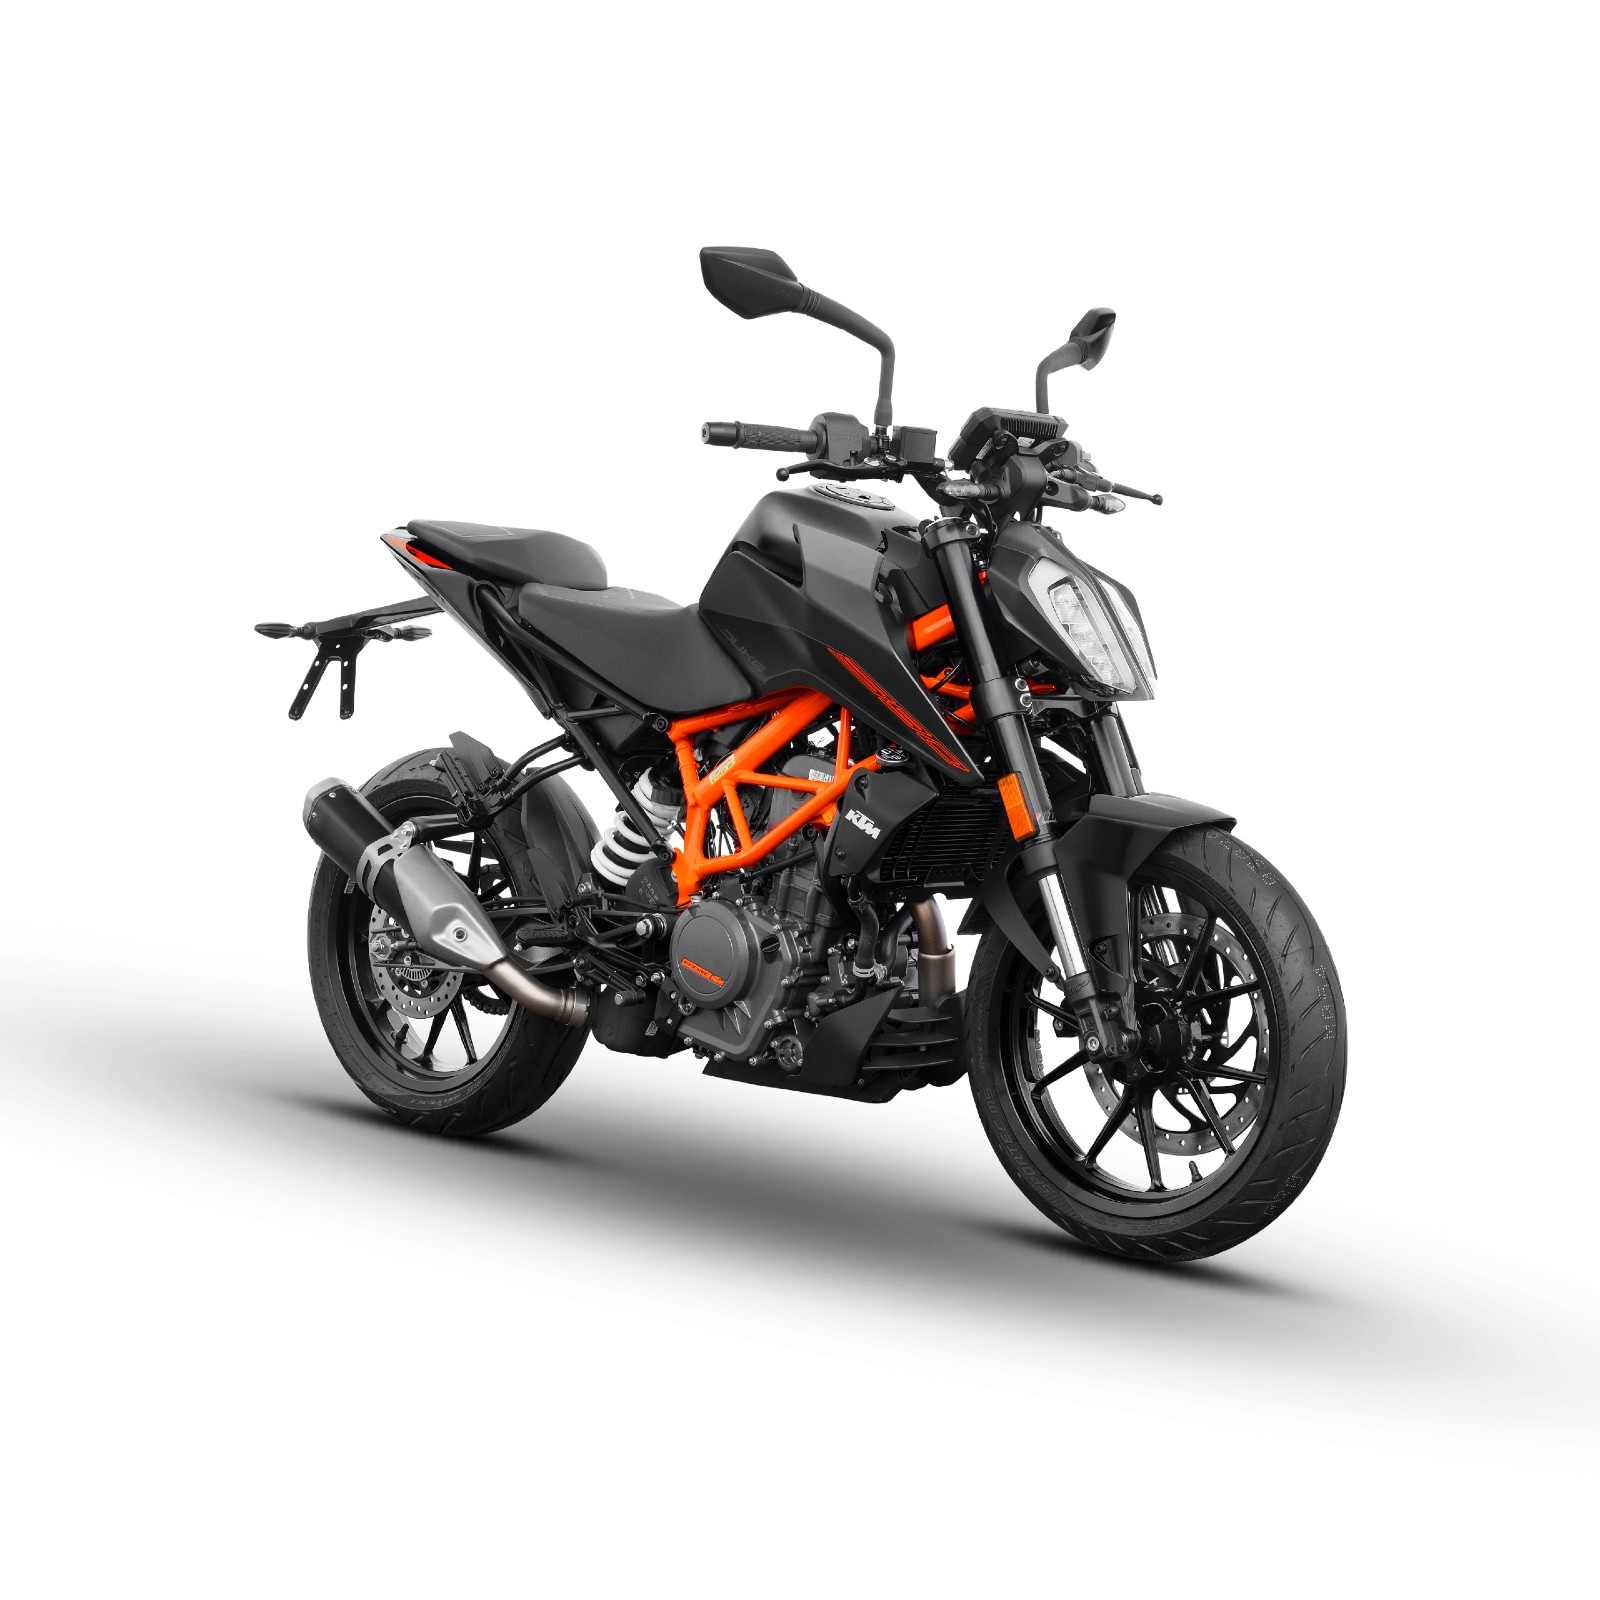 Live With This: 2019 KTM 790 Duke Long-Term Review | Motorcycle.com